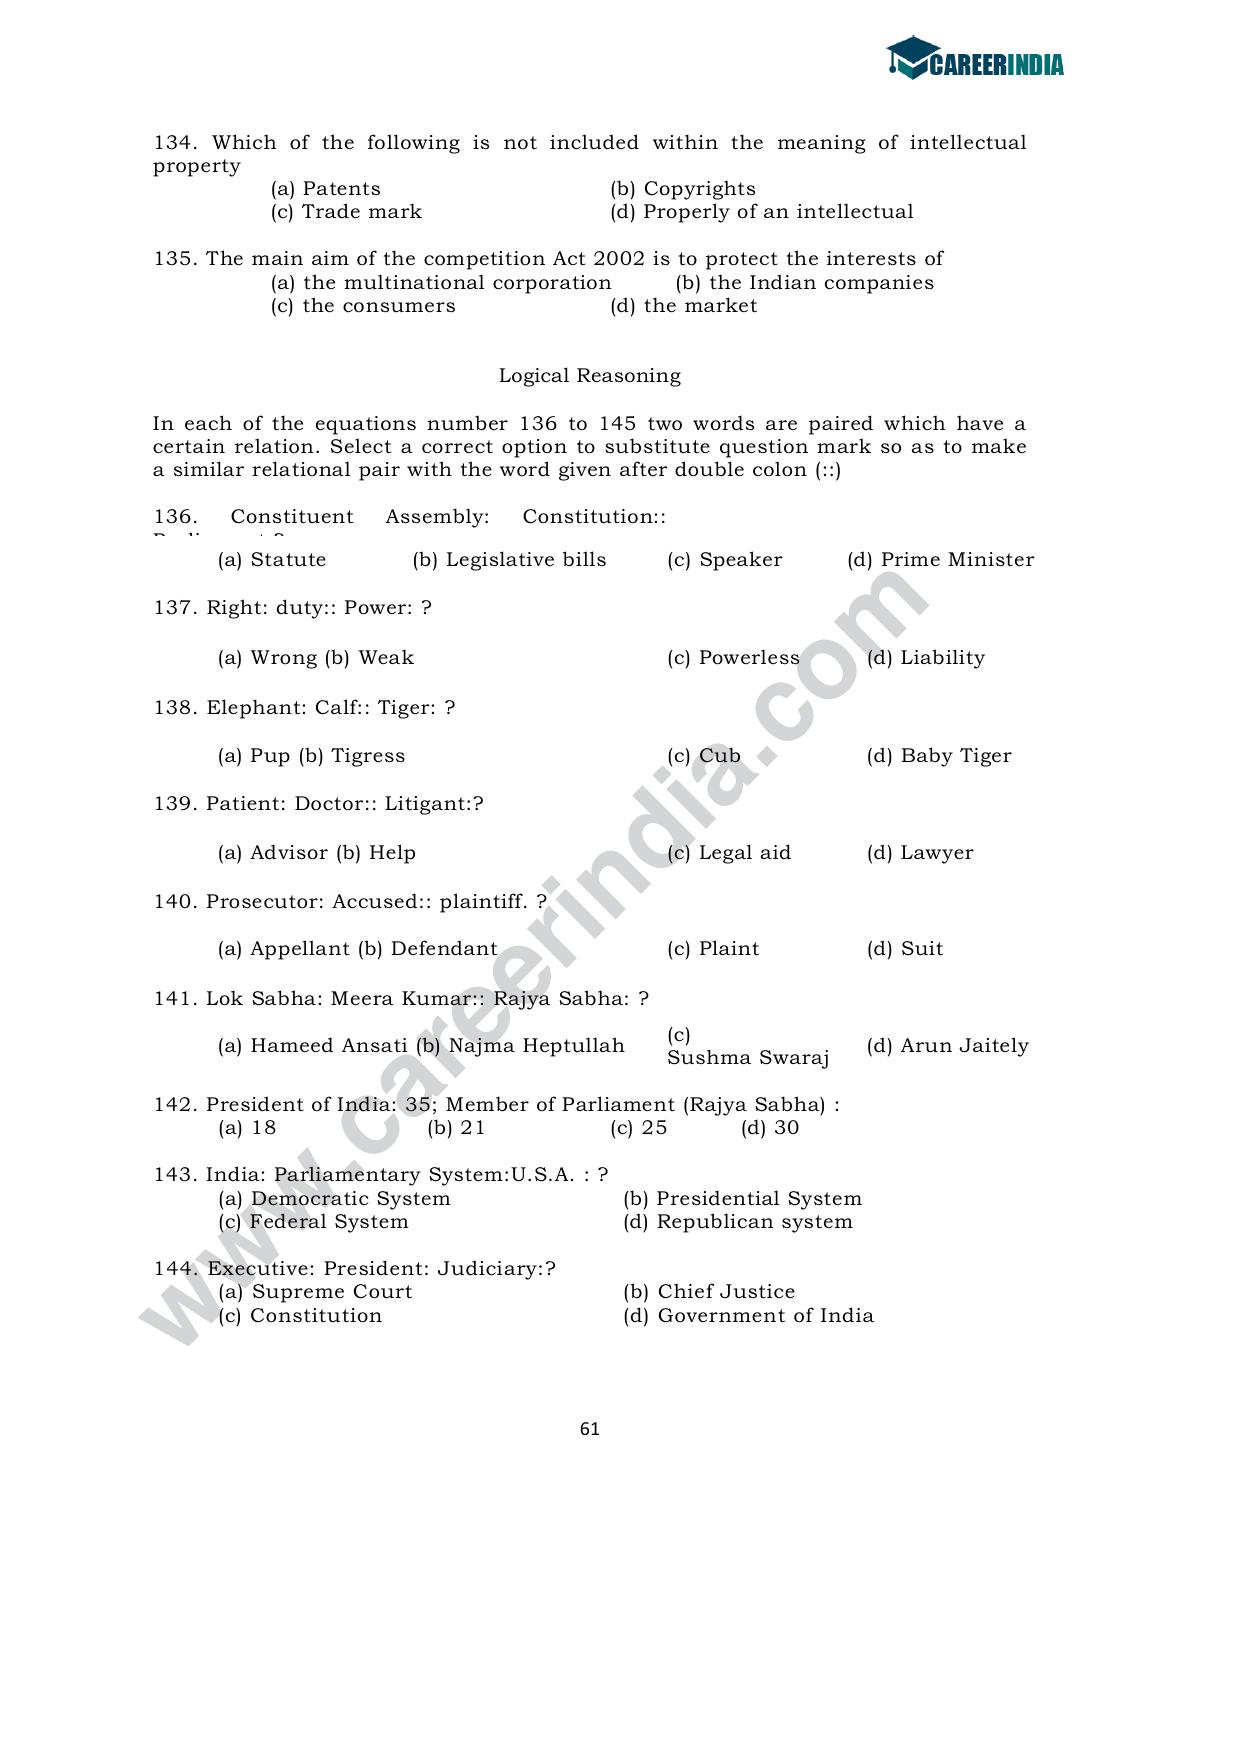 CLAT 2010 UG Sample Question Paper - Page 14